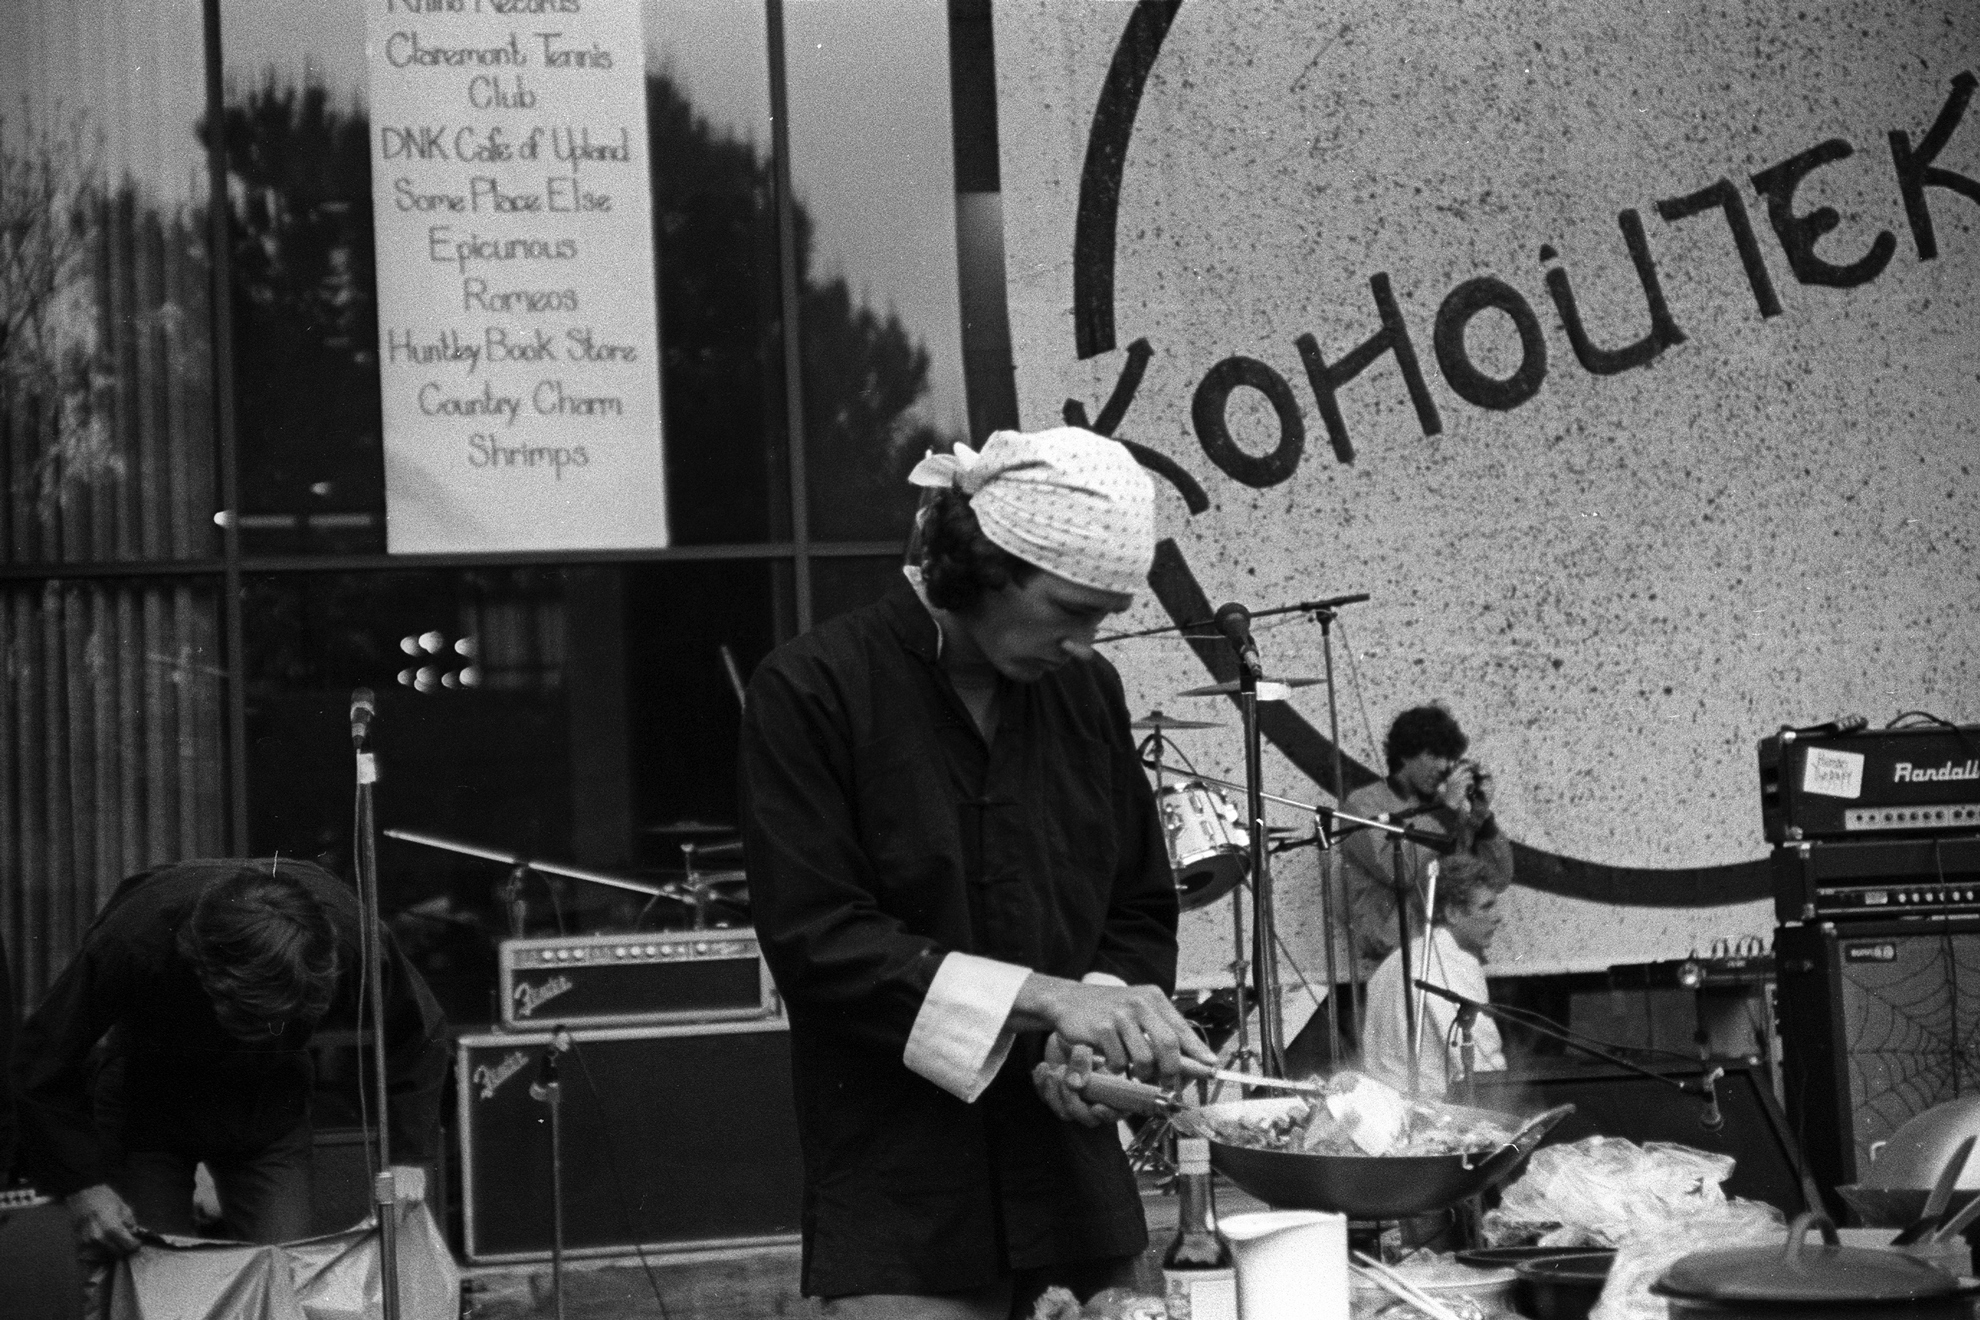 1985 Khoutek - Doing a little stir frying in front of the stage -- performance art, perhaps?